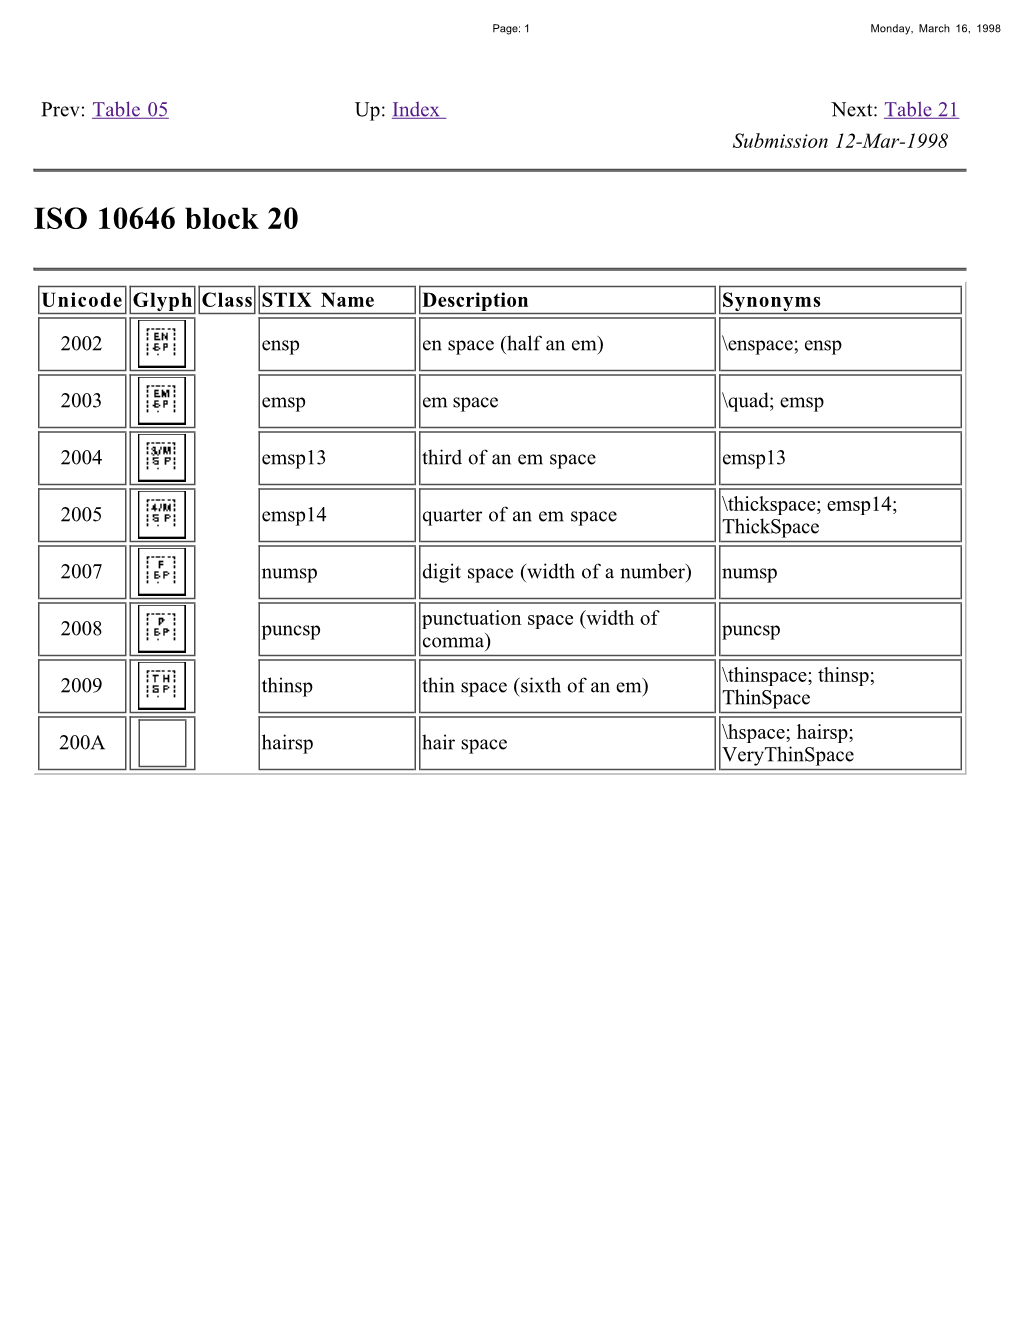 Index Next: Table 21 Submission 12-Mar-1998